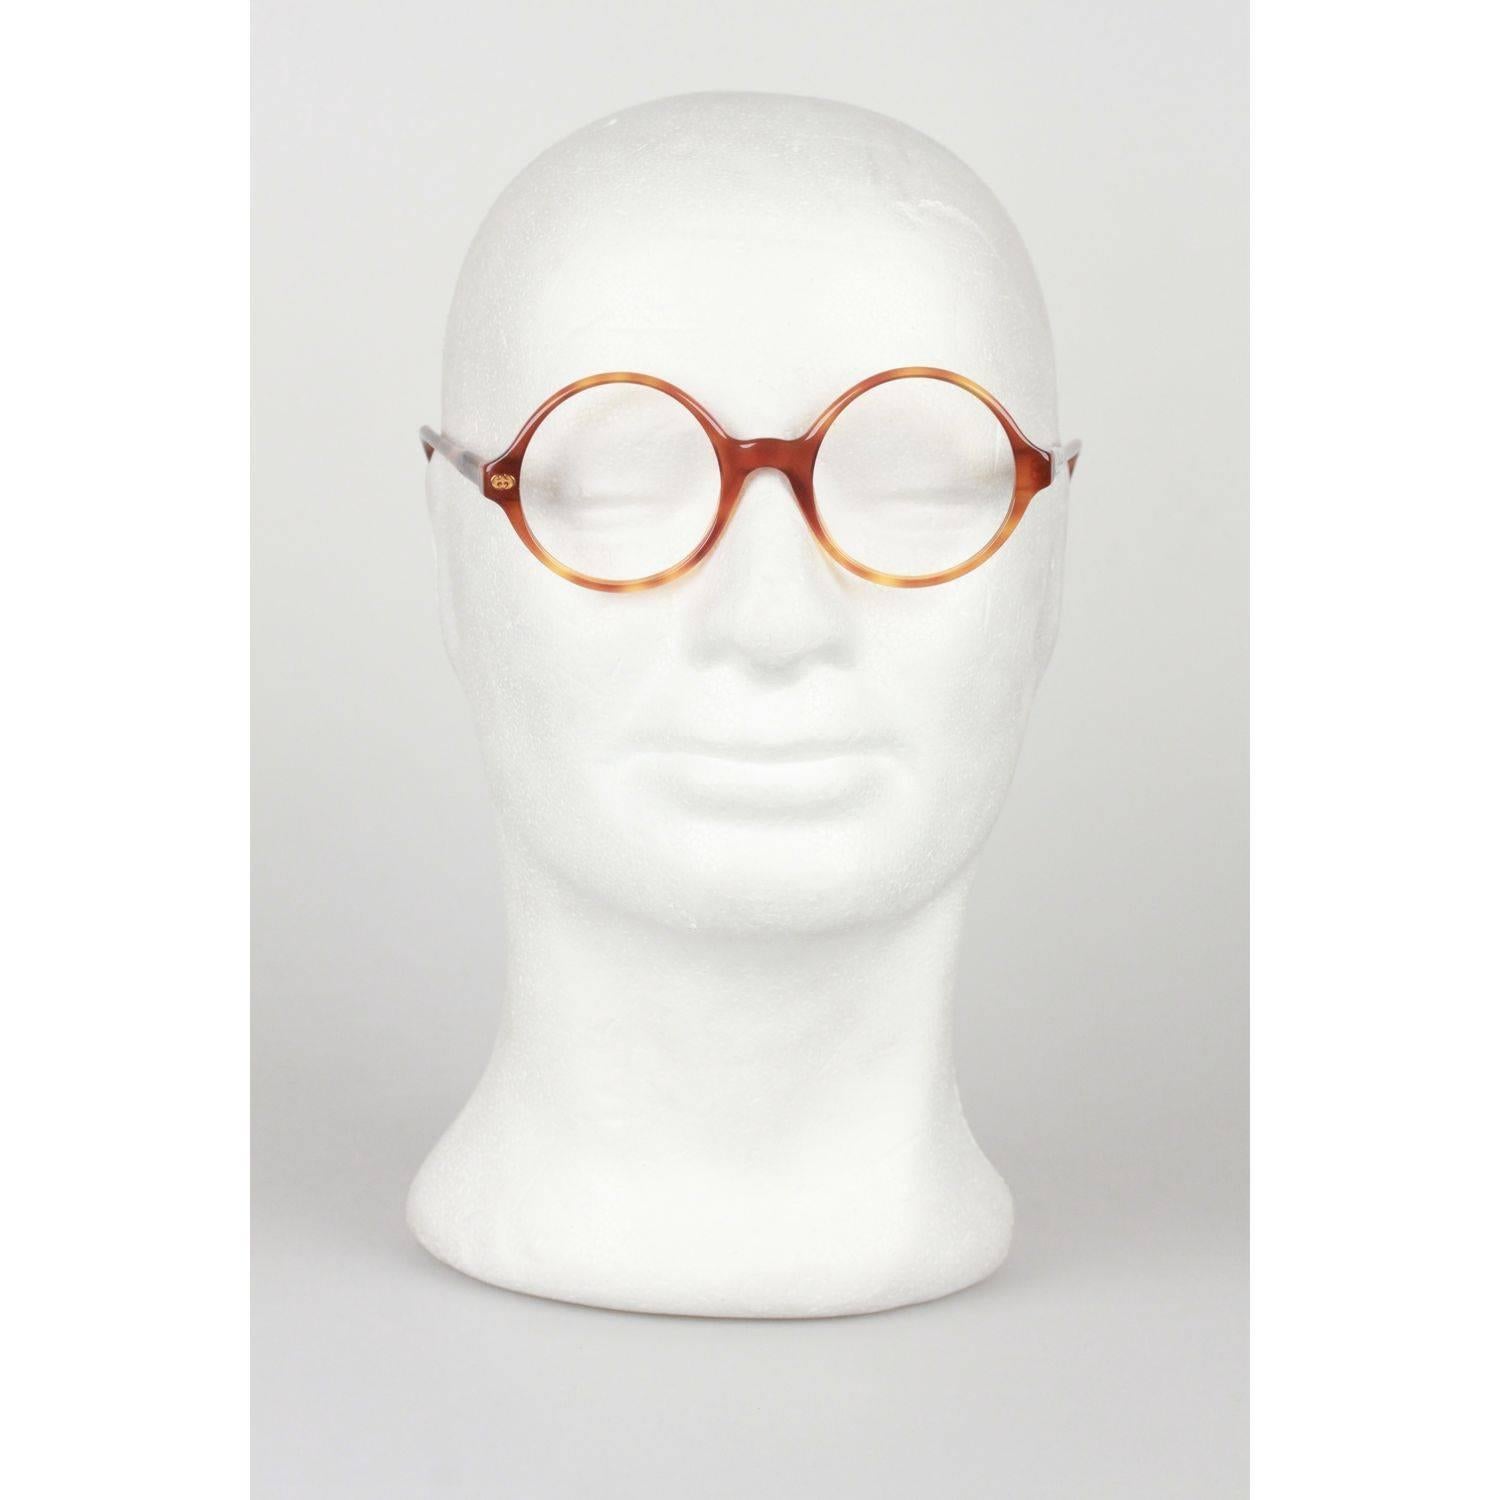 - Original Vintage frame by GUCCI
- Mod. GG 2122
- Tortoise ROUND eyeglasses
- Size 50/21
- No lenses
- Small GG - GUCCI logo on the front right corner
 
NOS (NEW OLD STOCK) - Come with a Generic Case
Measurements:
- TEMPLE MAX. LENGTH: 140 mm
-